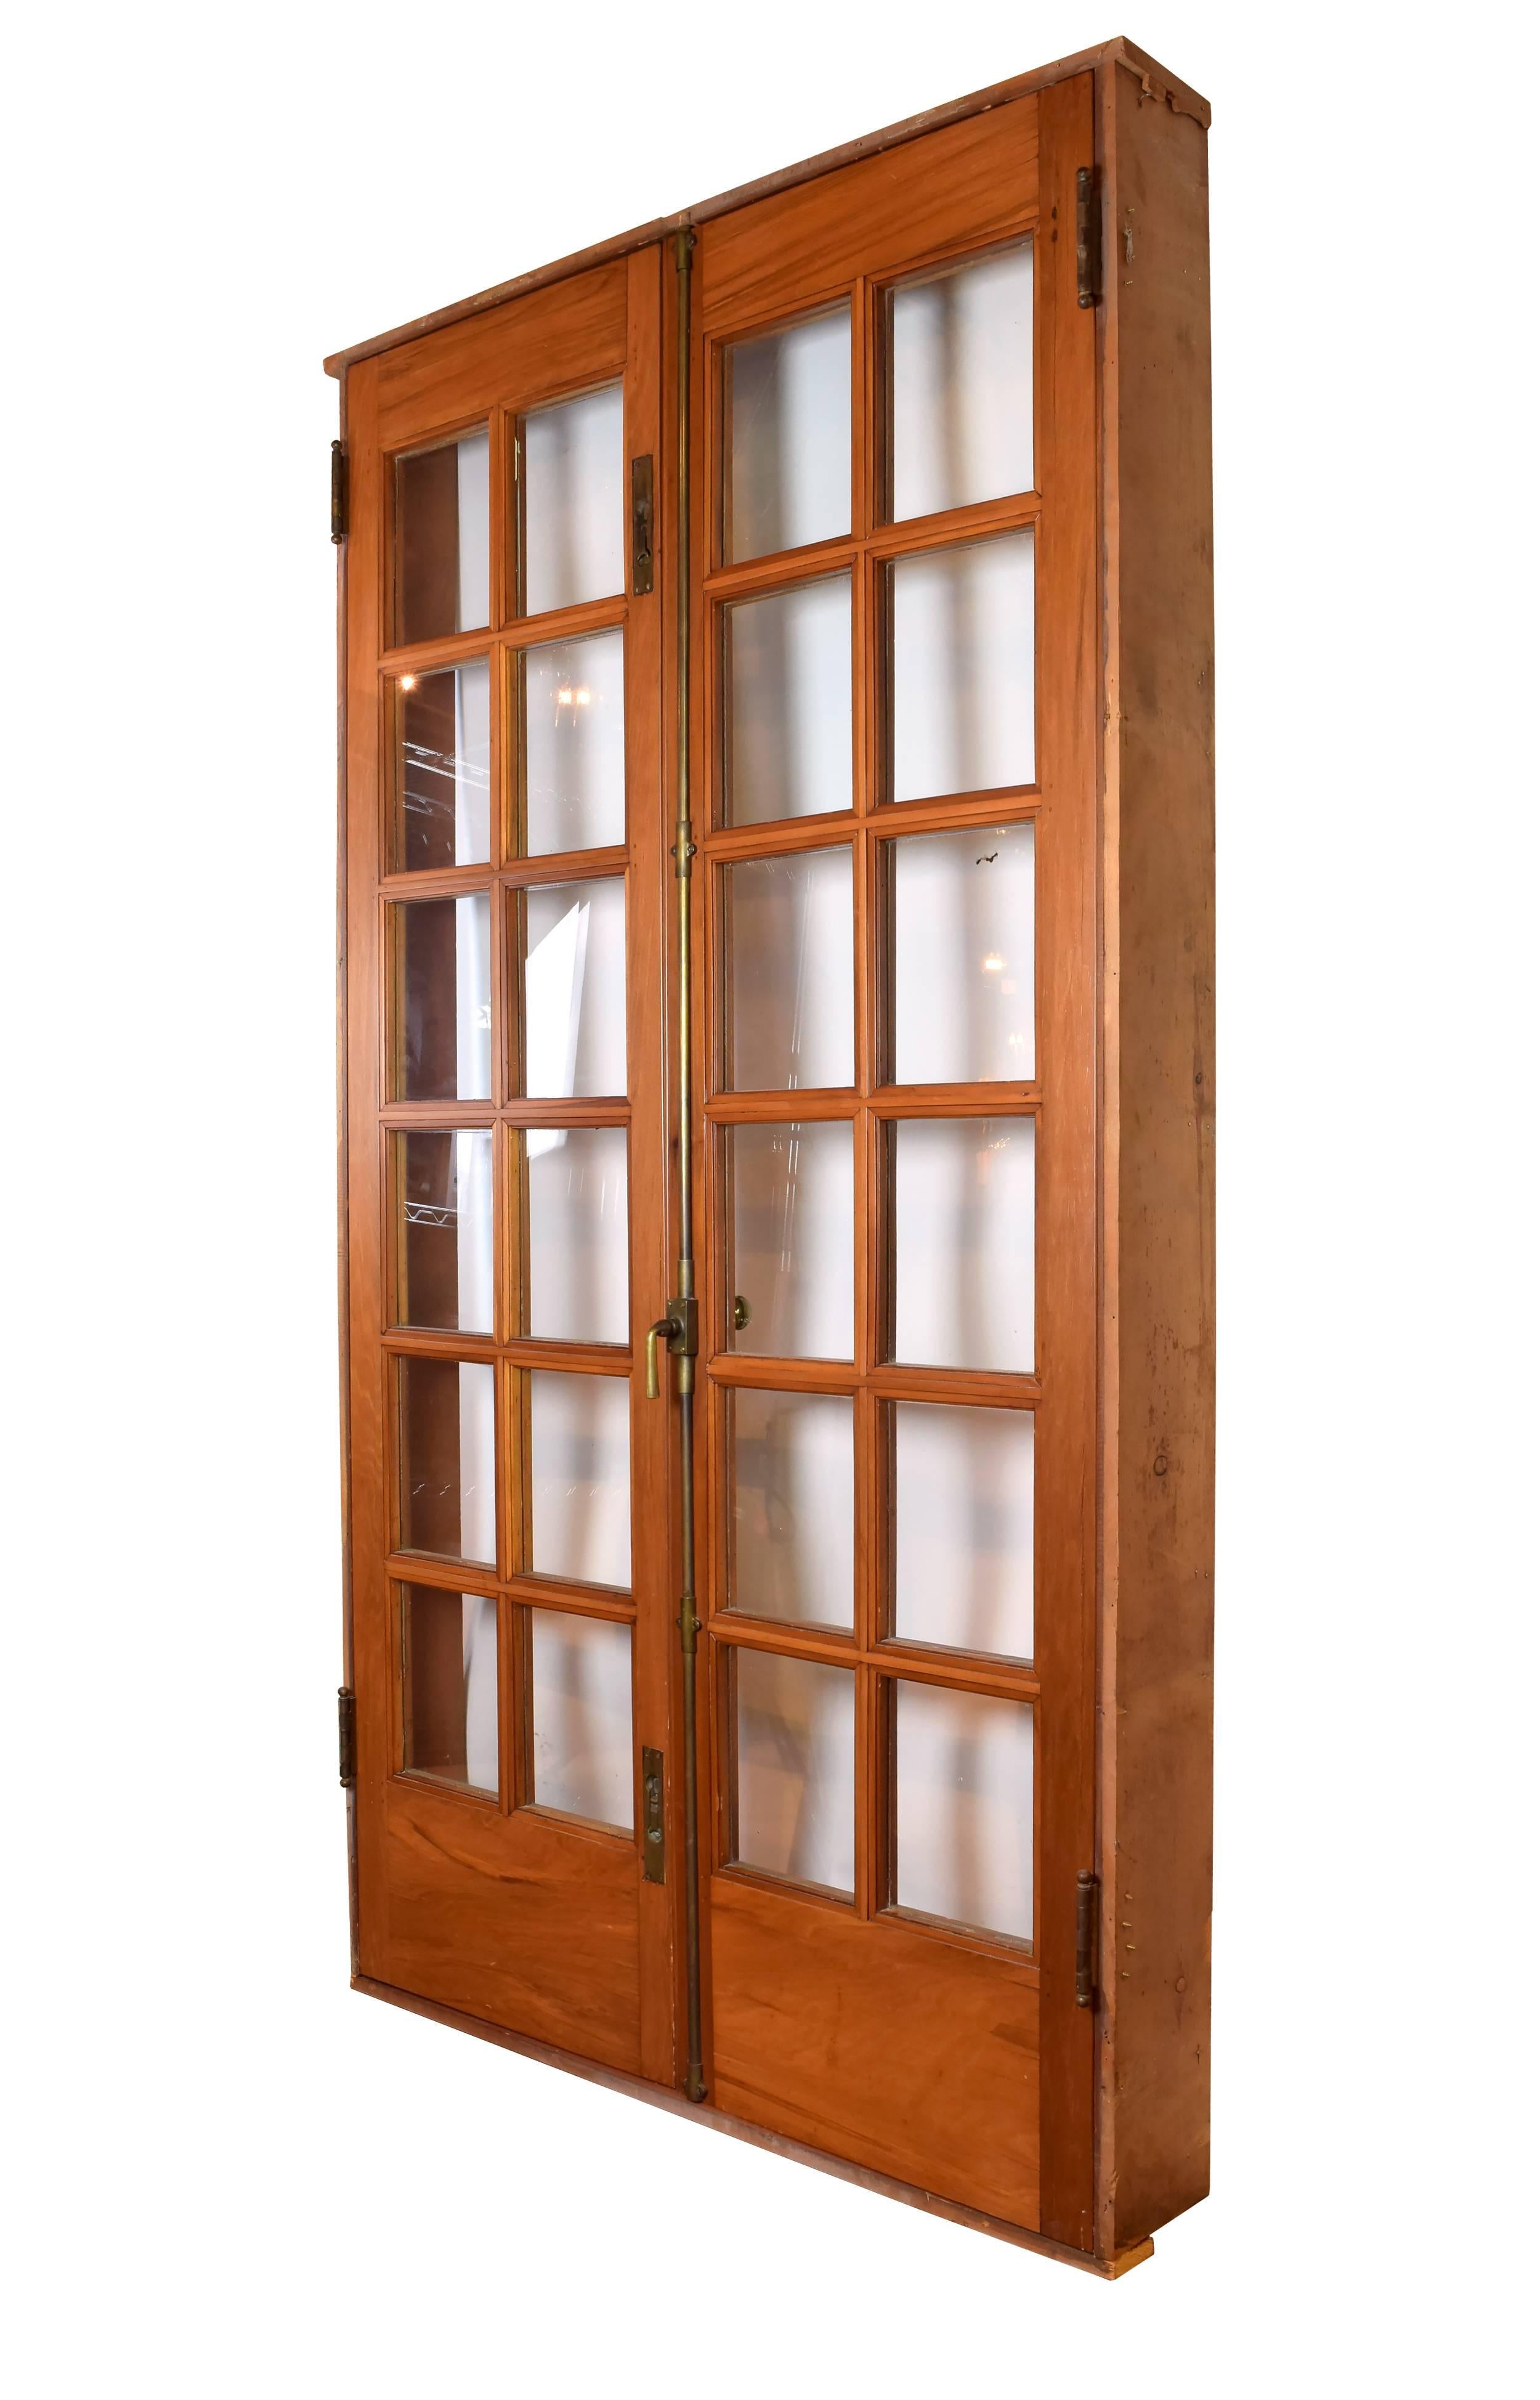 This beautiful French door set comes complete with an attractive brass cremone bolt, which latches the top and bottom of the door with one turn of the handle. Additionally, the jamb is intact, giving the set a more polished look,

circa